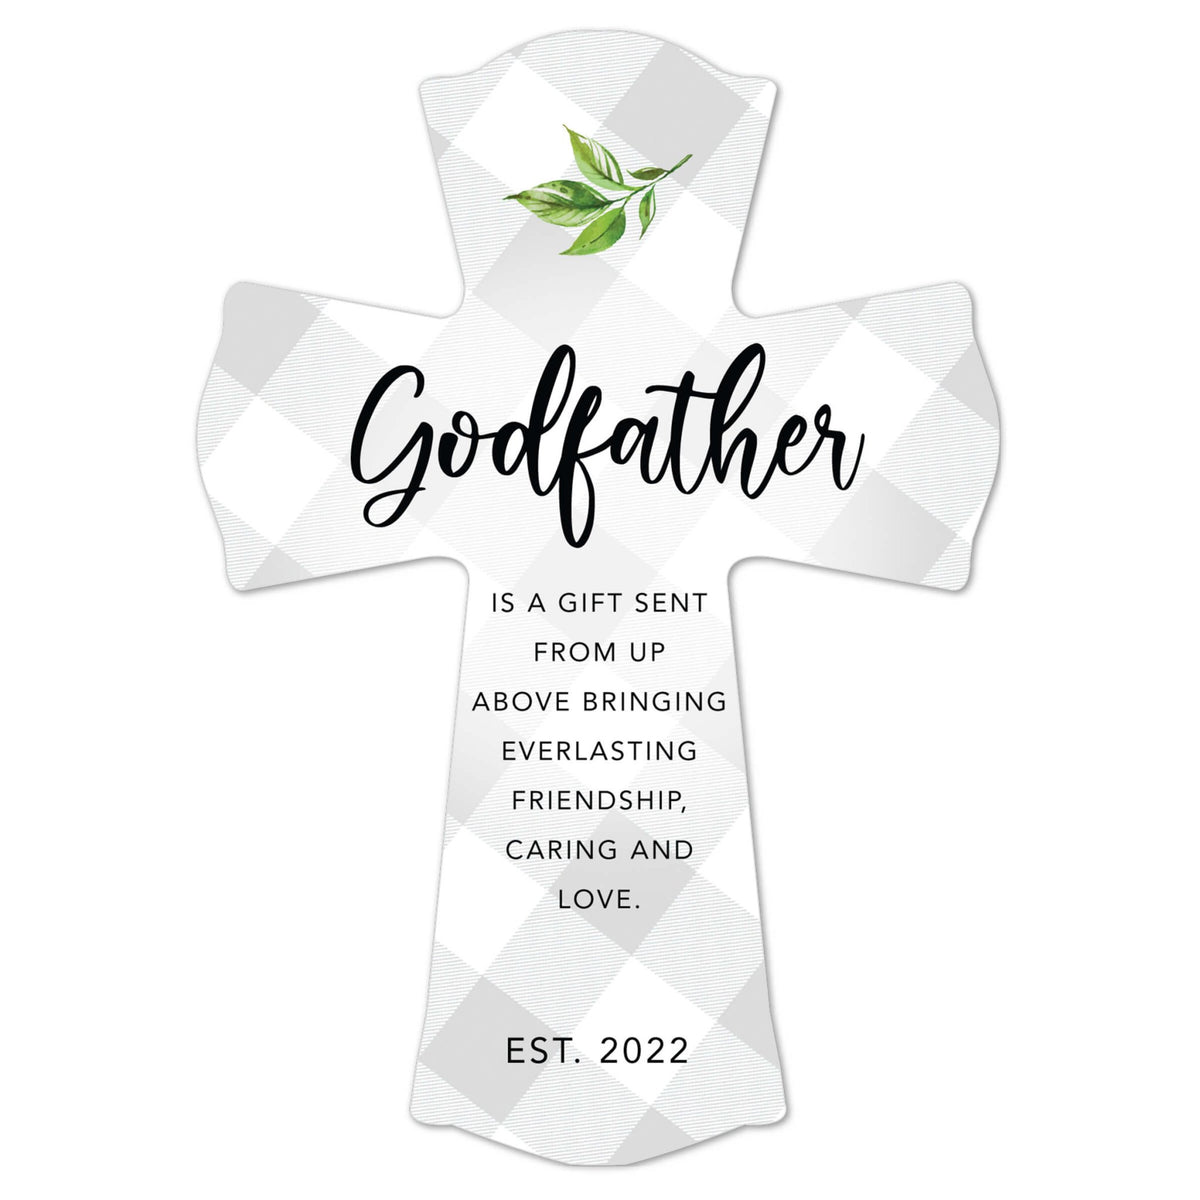 Personalized Wooden Wall Cross for Godfather - LifeSong Milestones